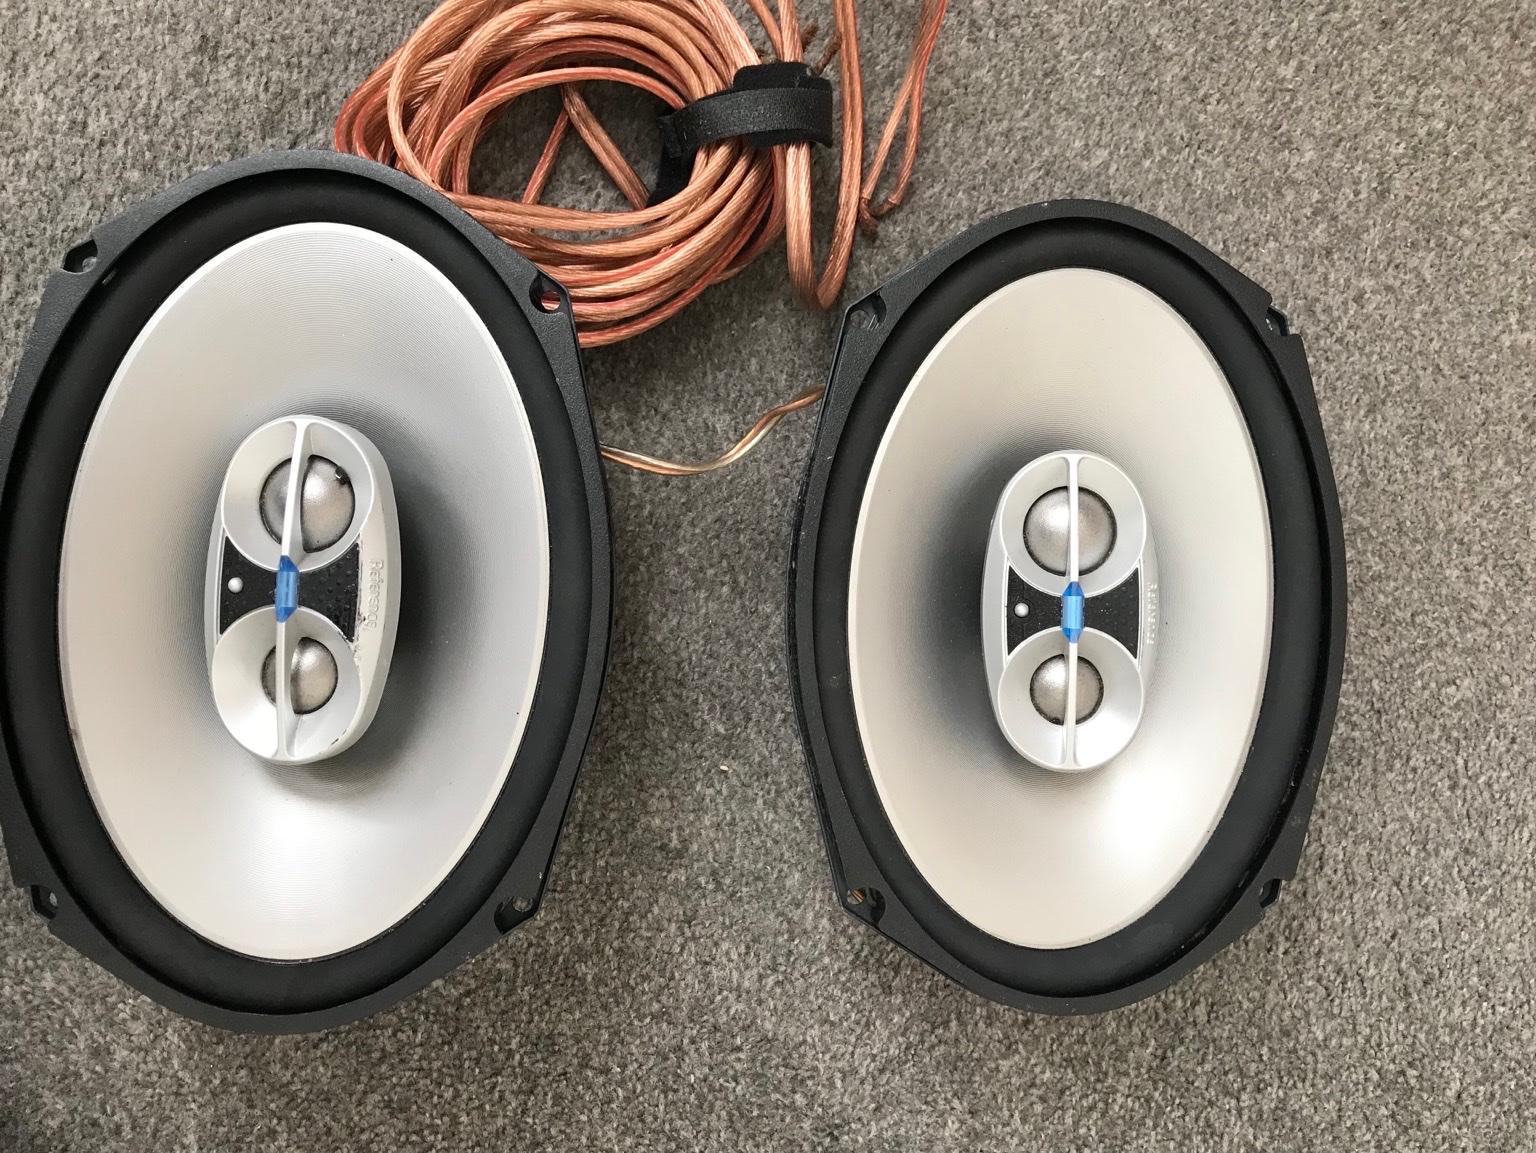 b'( PRE-OWNED ) INFINITY SPEAKERS #1' for sale  